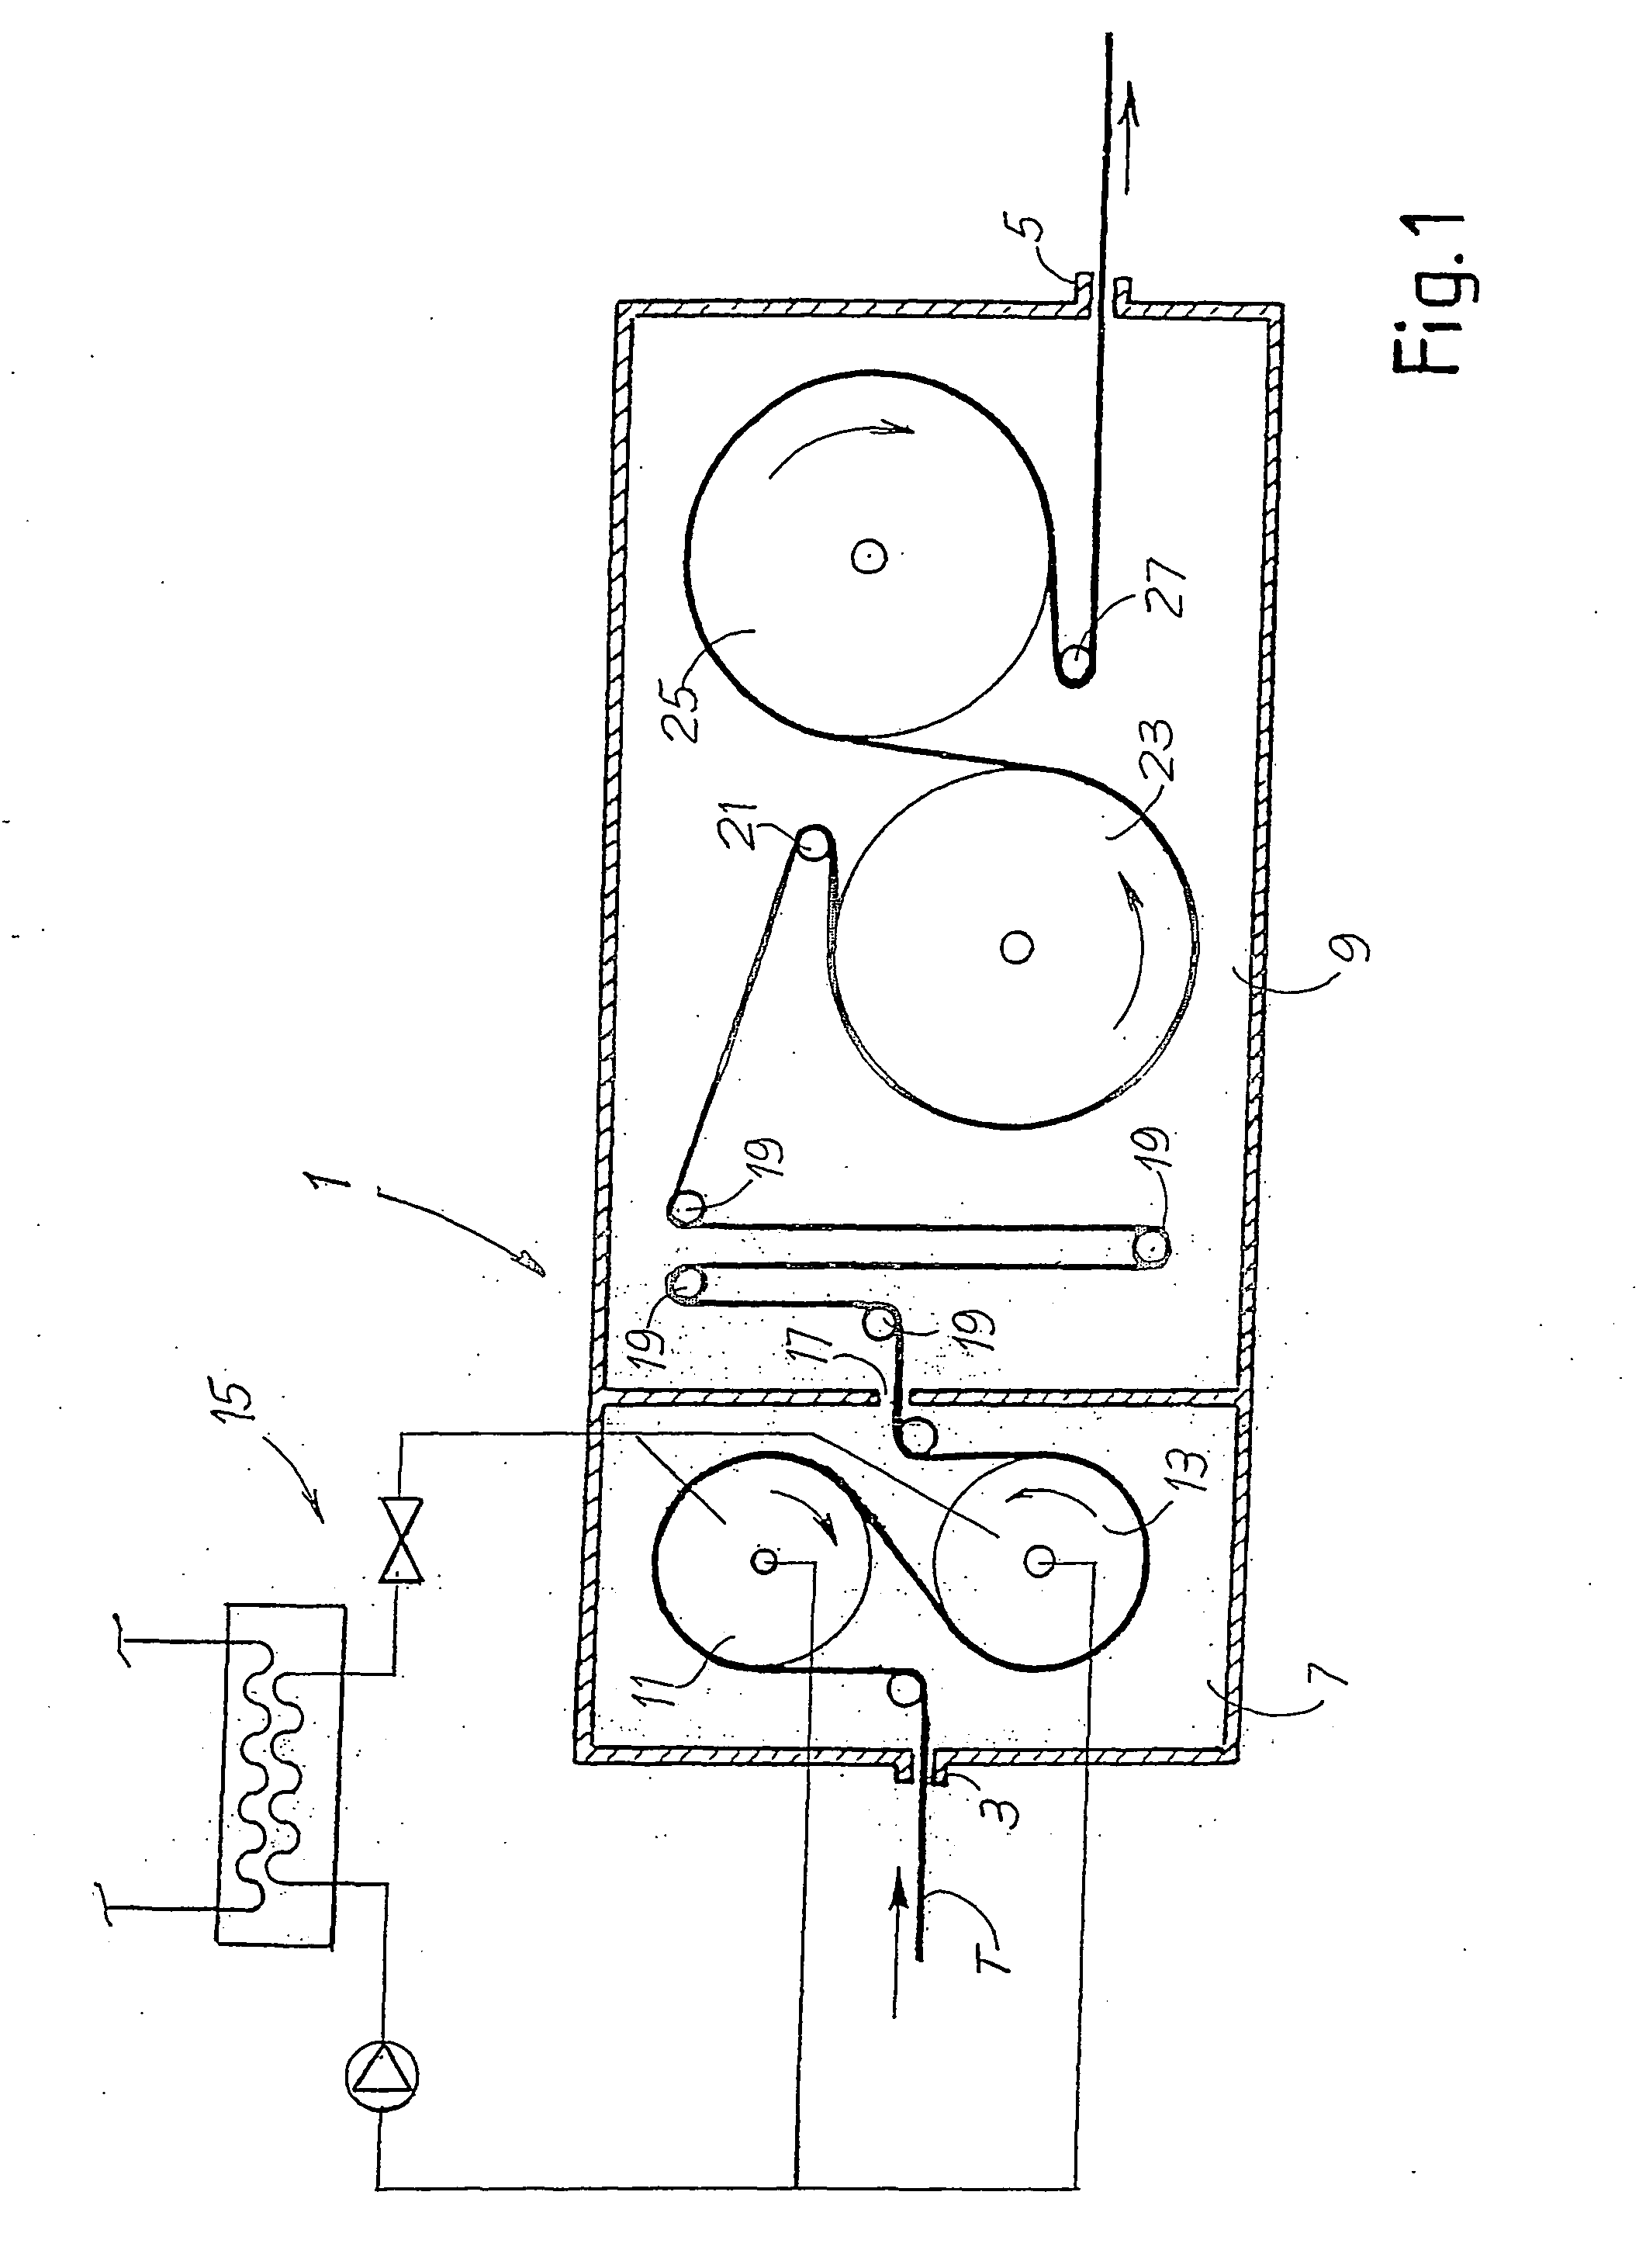 Method and machine for treating textile materials by ammonia or other liquids